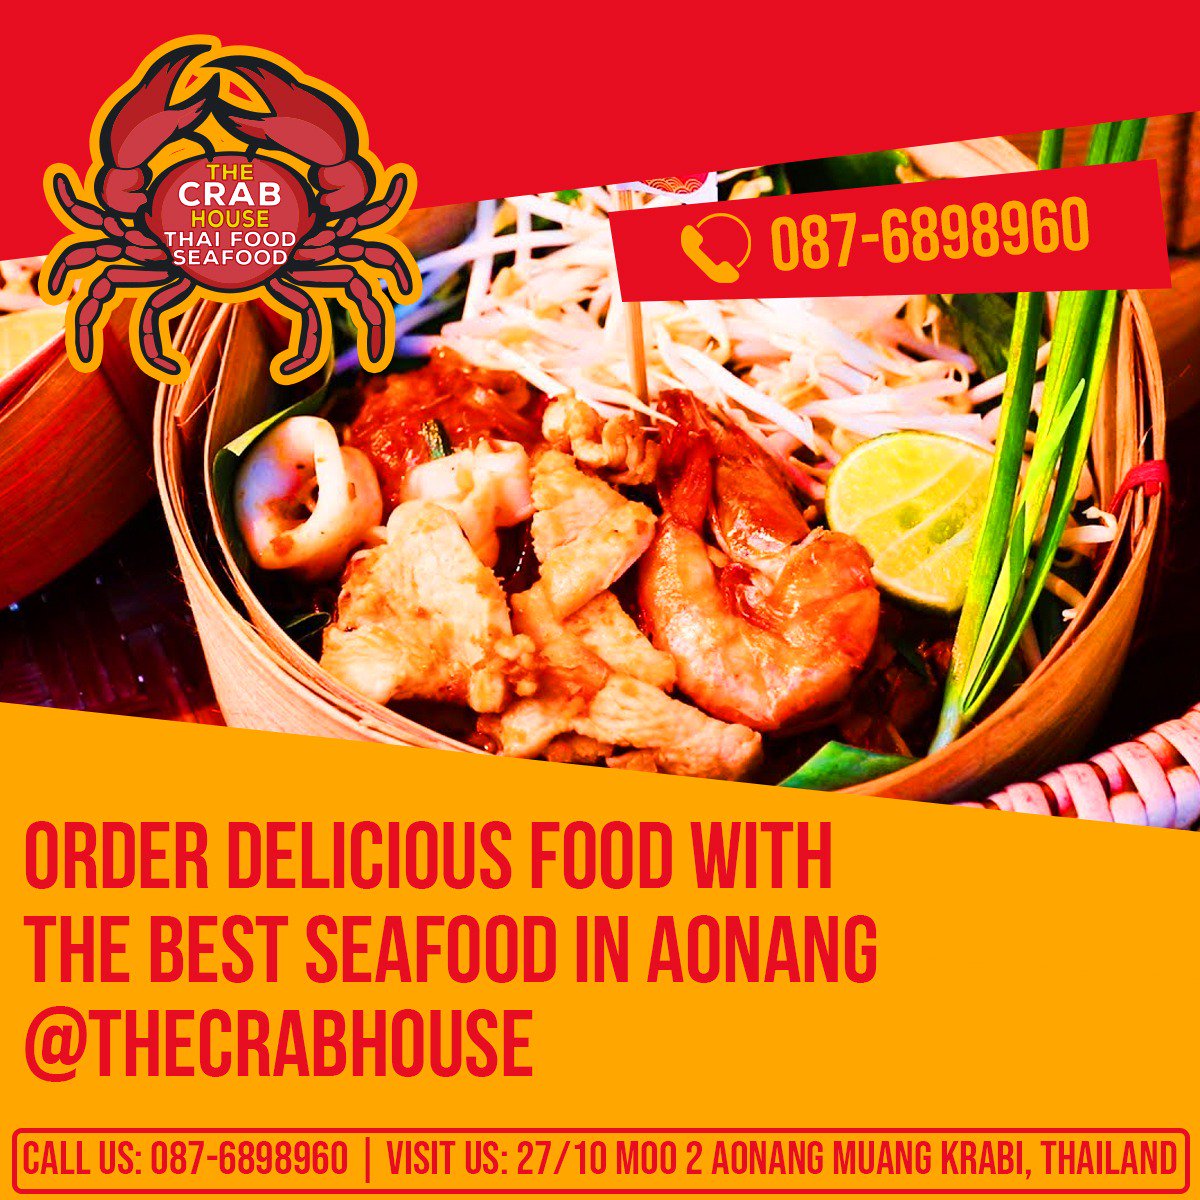 Order Delicious Food with the best #Seafood😋 in #AoNang -The Crab House
Call Now📲087-6898960
💁‍♀️27/10 moo 2 AoNang Muang Krabi,Thailand
#DeliciousSeaFood #KrabiDinner #PerfectLunchPlaceAoNang #DeliciousSnacksDrinkLoversAtAoNang #AoNang #Thailand #Krabi #PerfectMorningBreakfast